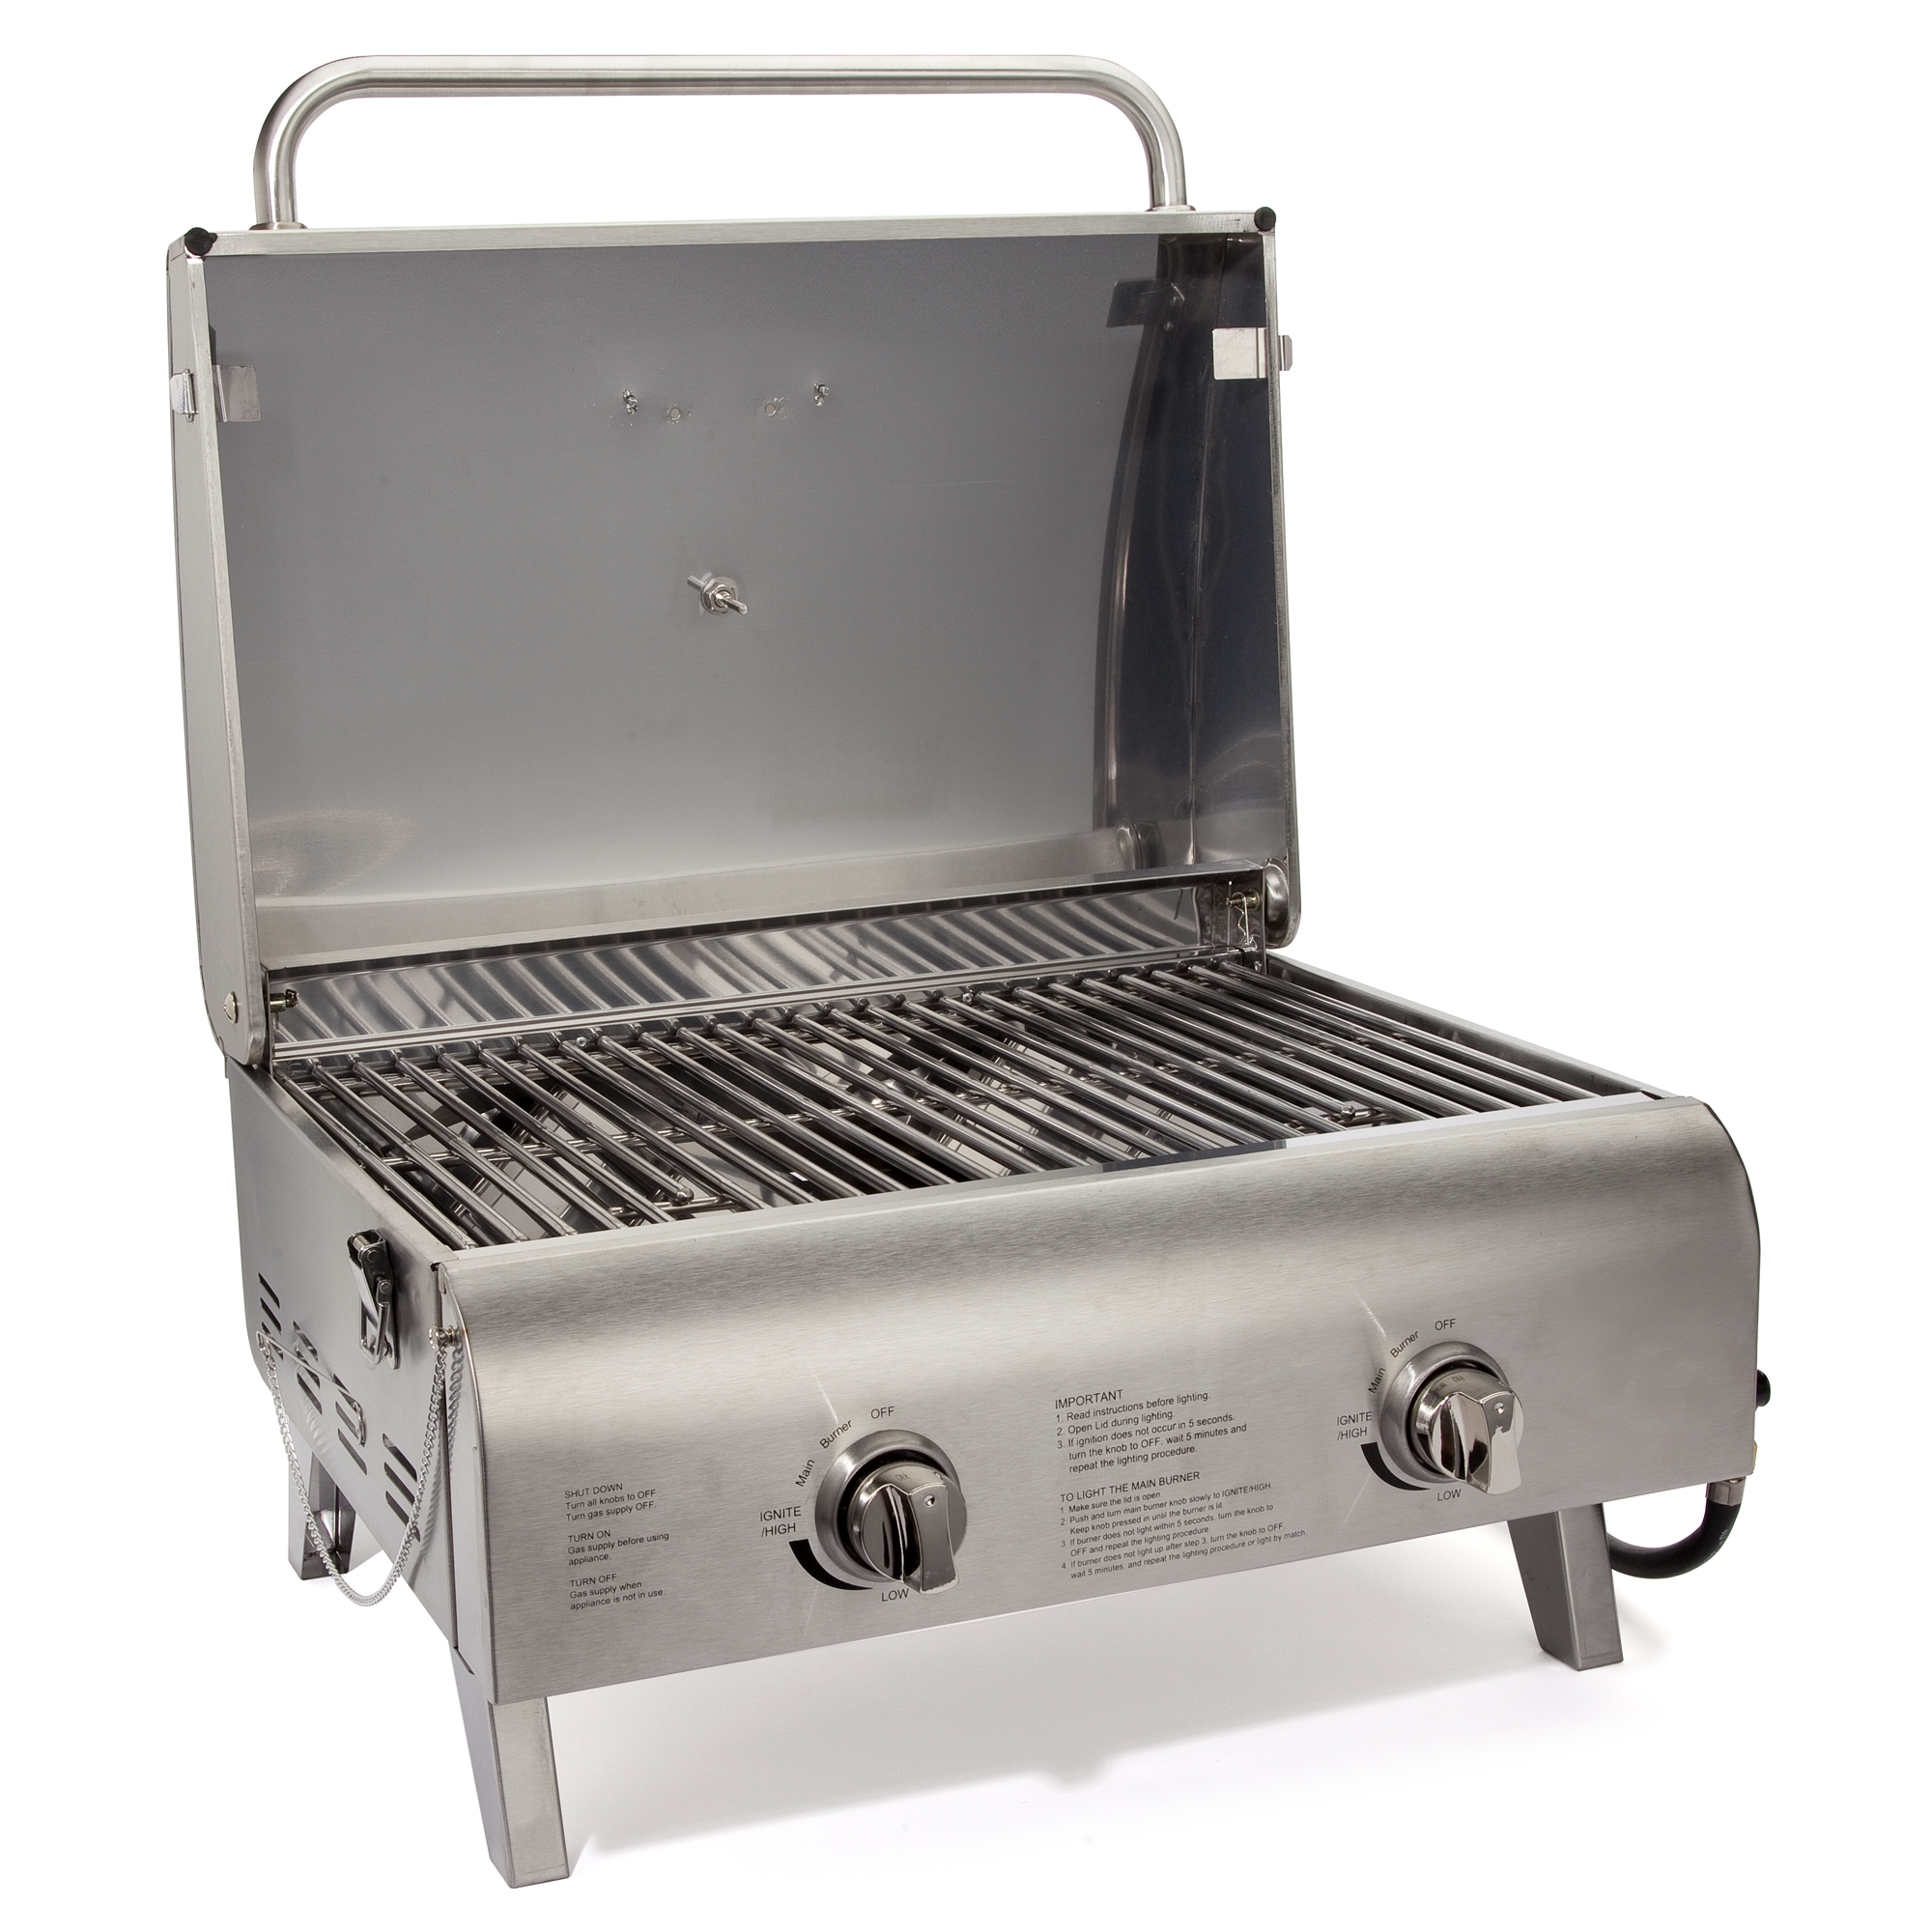 Cuisinart CGG-306 Chef's Style Stainless 2 Burner Tabletop Gas Grill, Silver - image 3 of 17